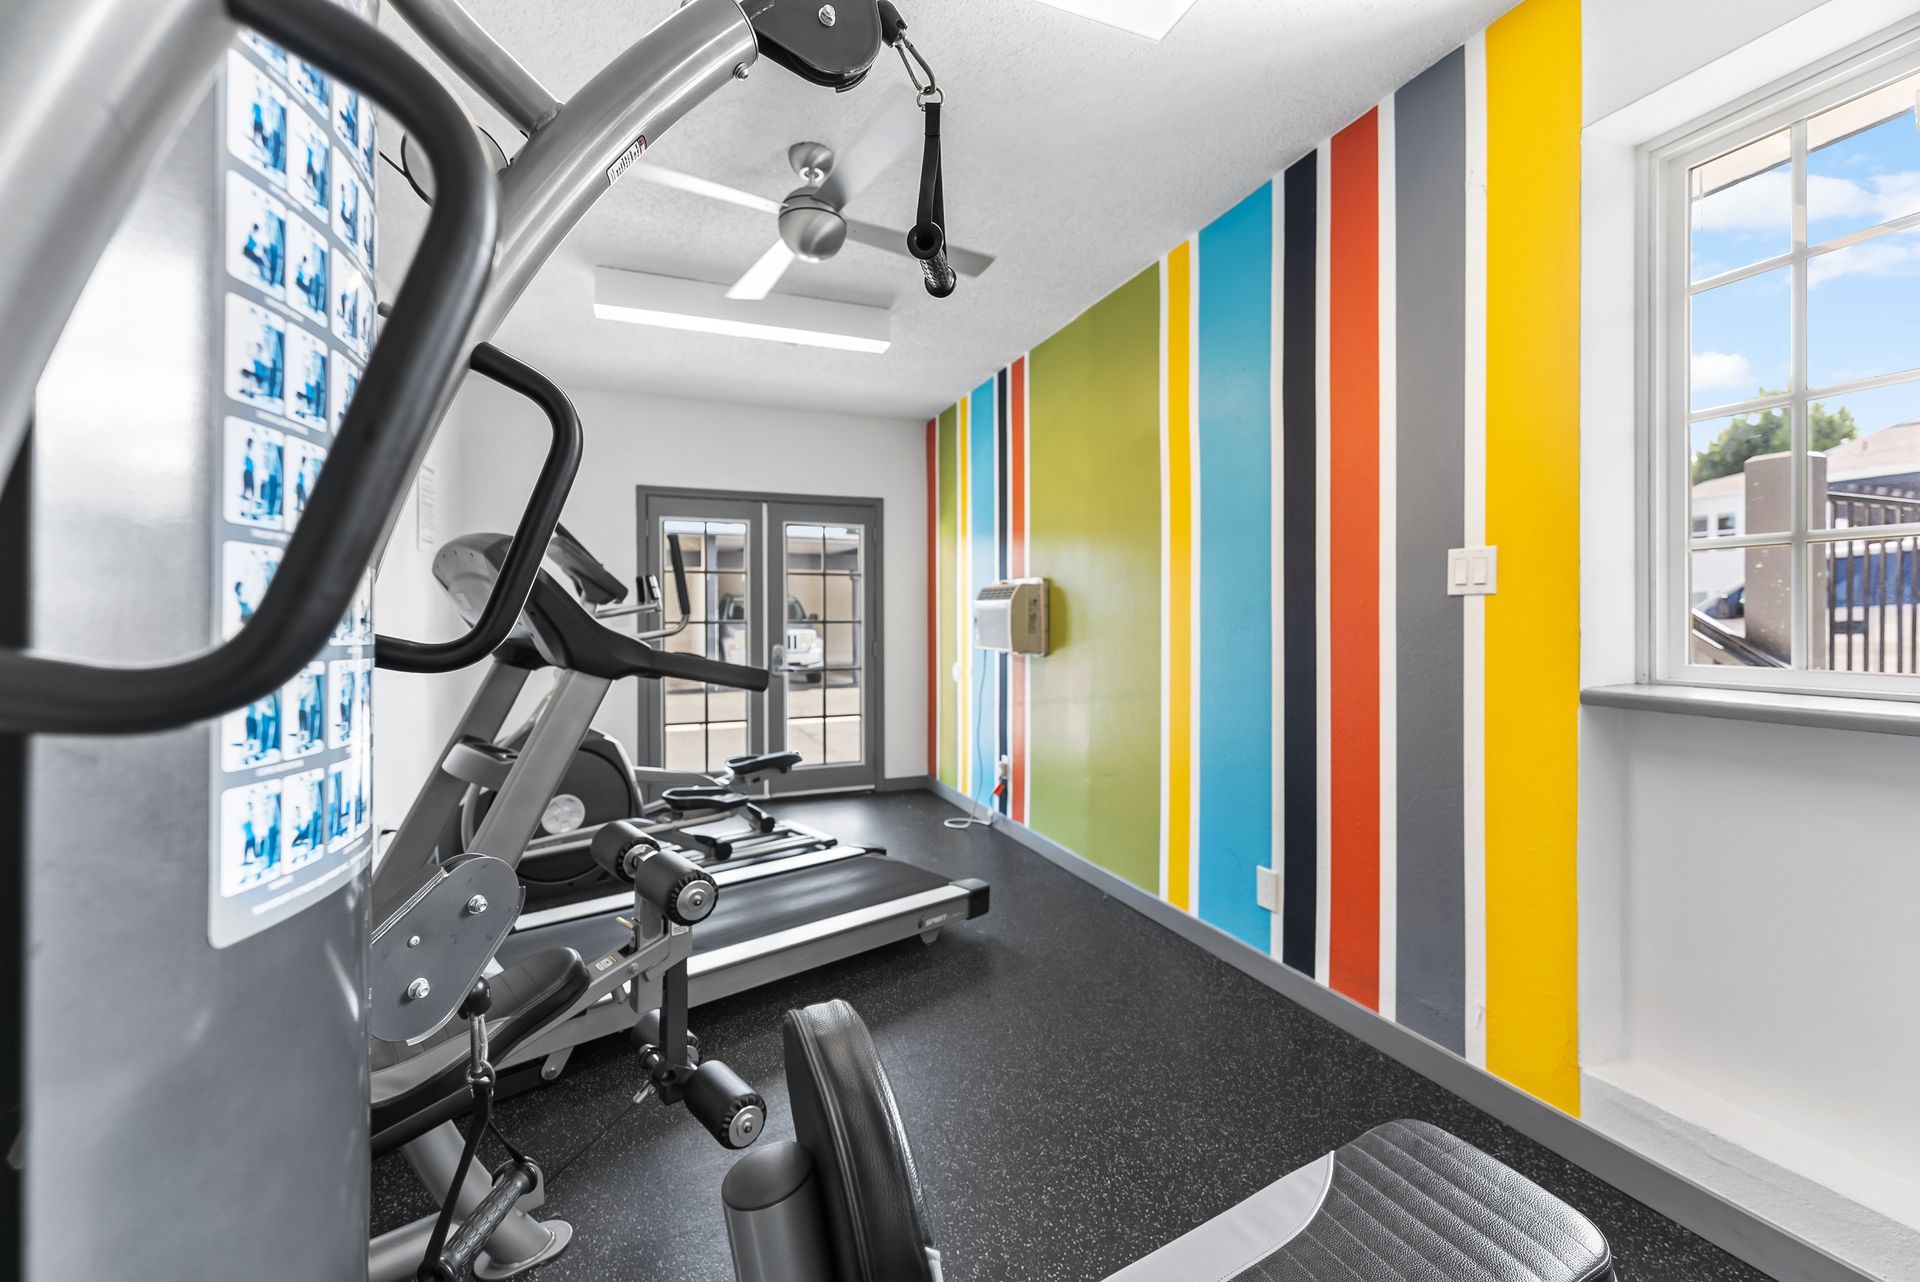 Sliding Photo Gallery Displaying Community Amenities - Fitness center with equipment